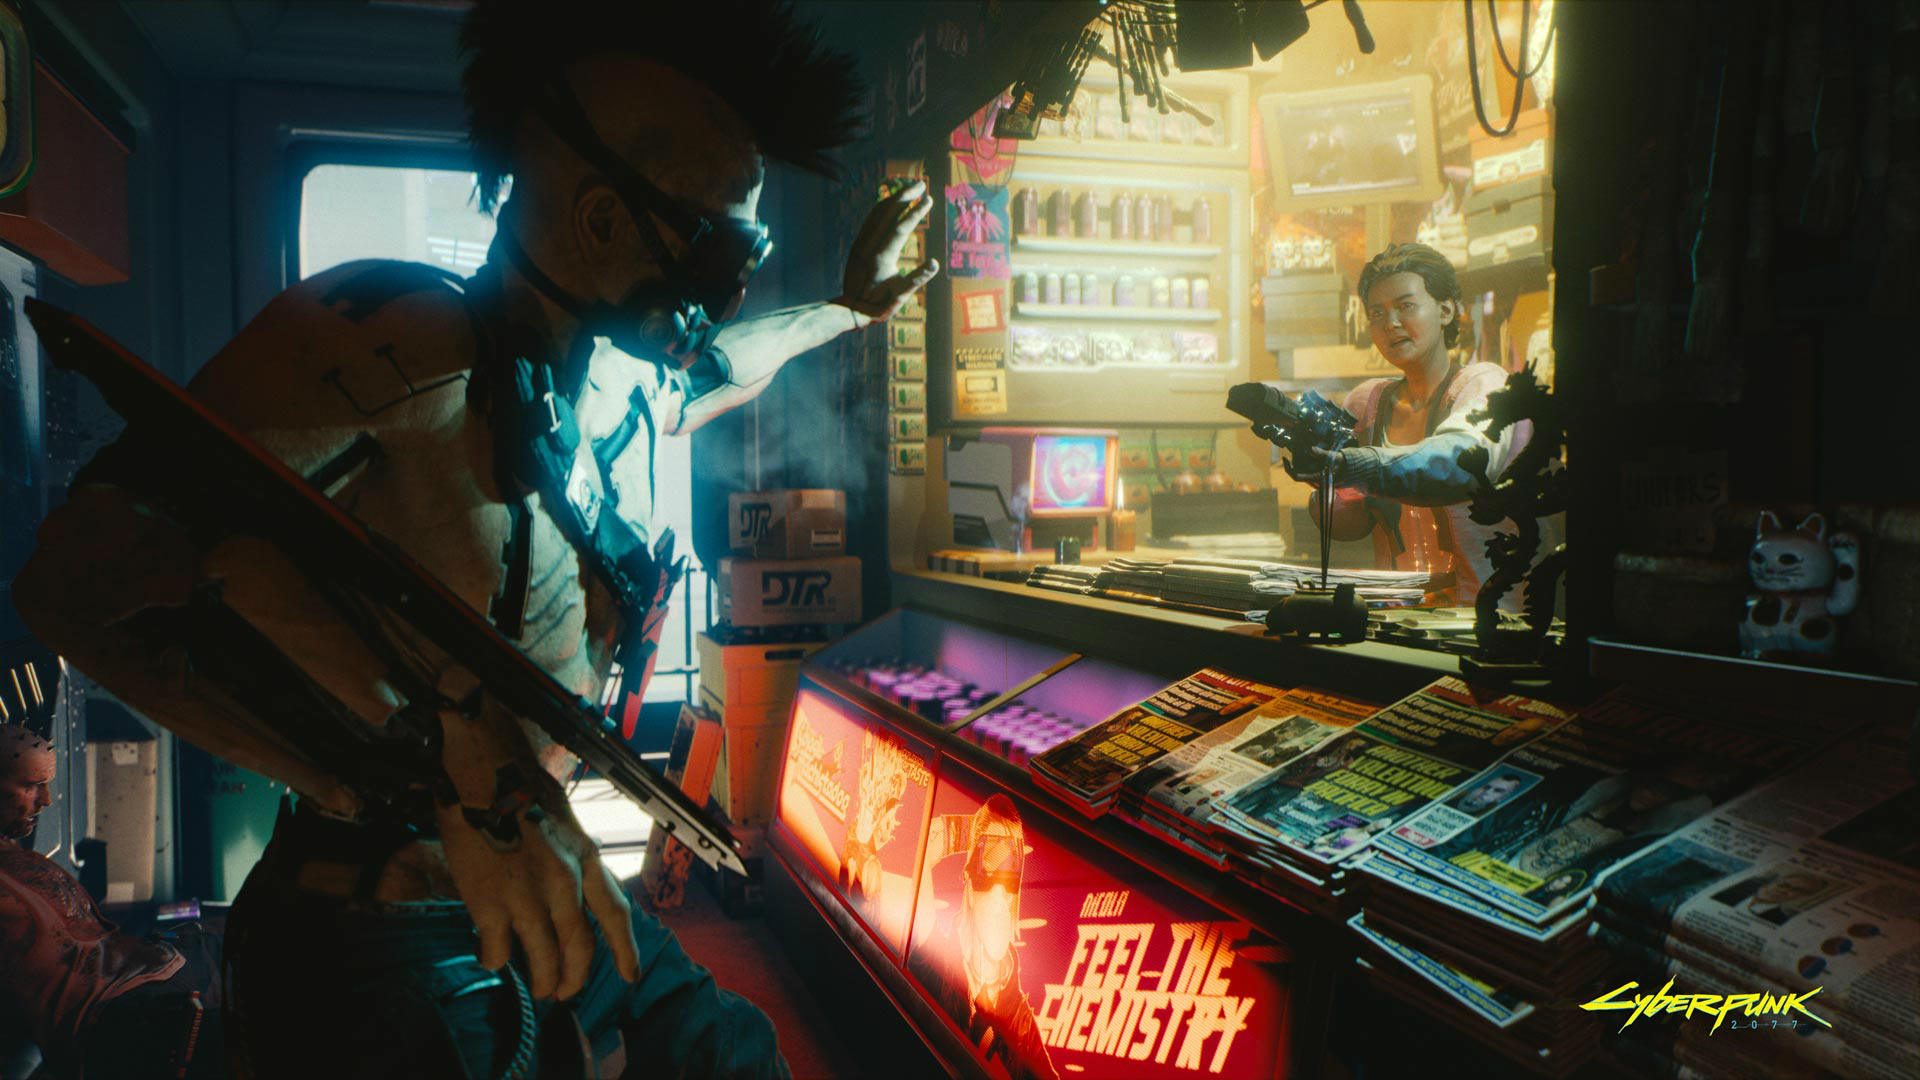 How to attempt a refund for the Region 3 version of ‘Cyberpunk 2077’